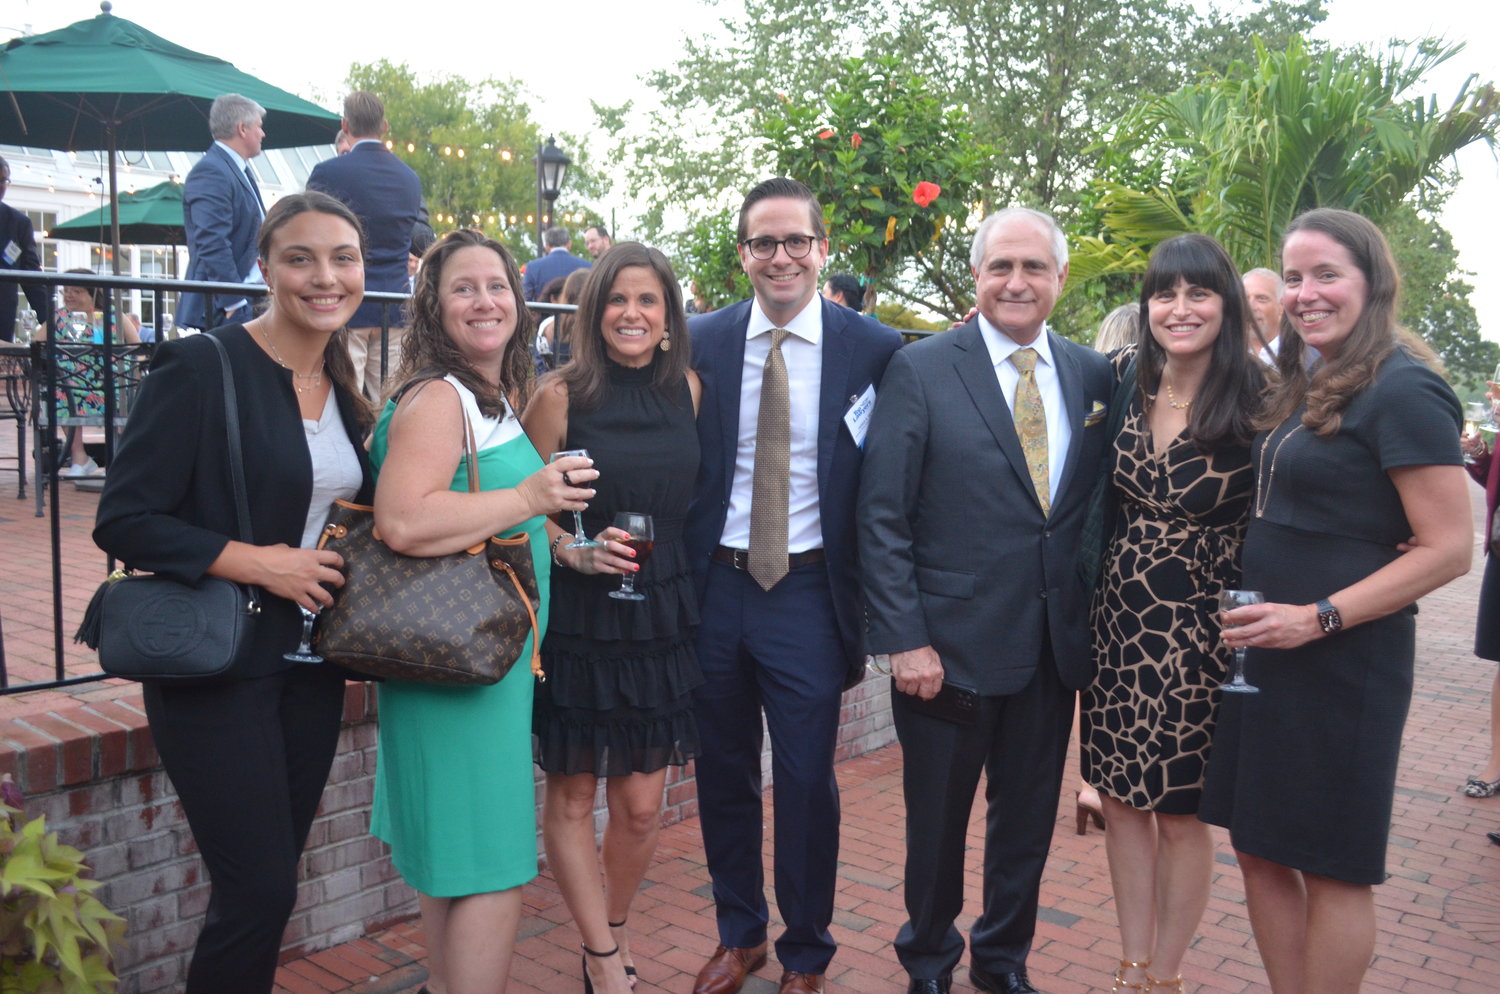 Jared Behr of Salenger, Sack, Kimmel & Bavaro LLP and guests strike a pose on the patio during the networking hour.